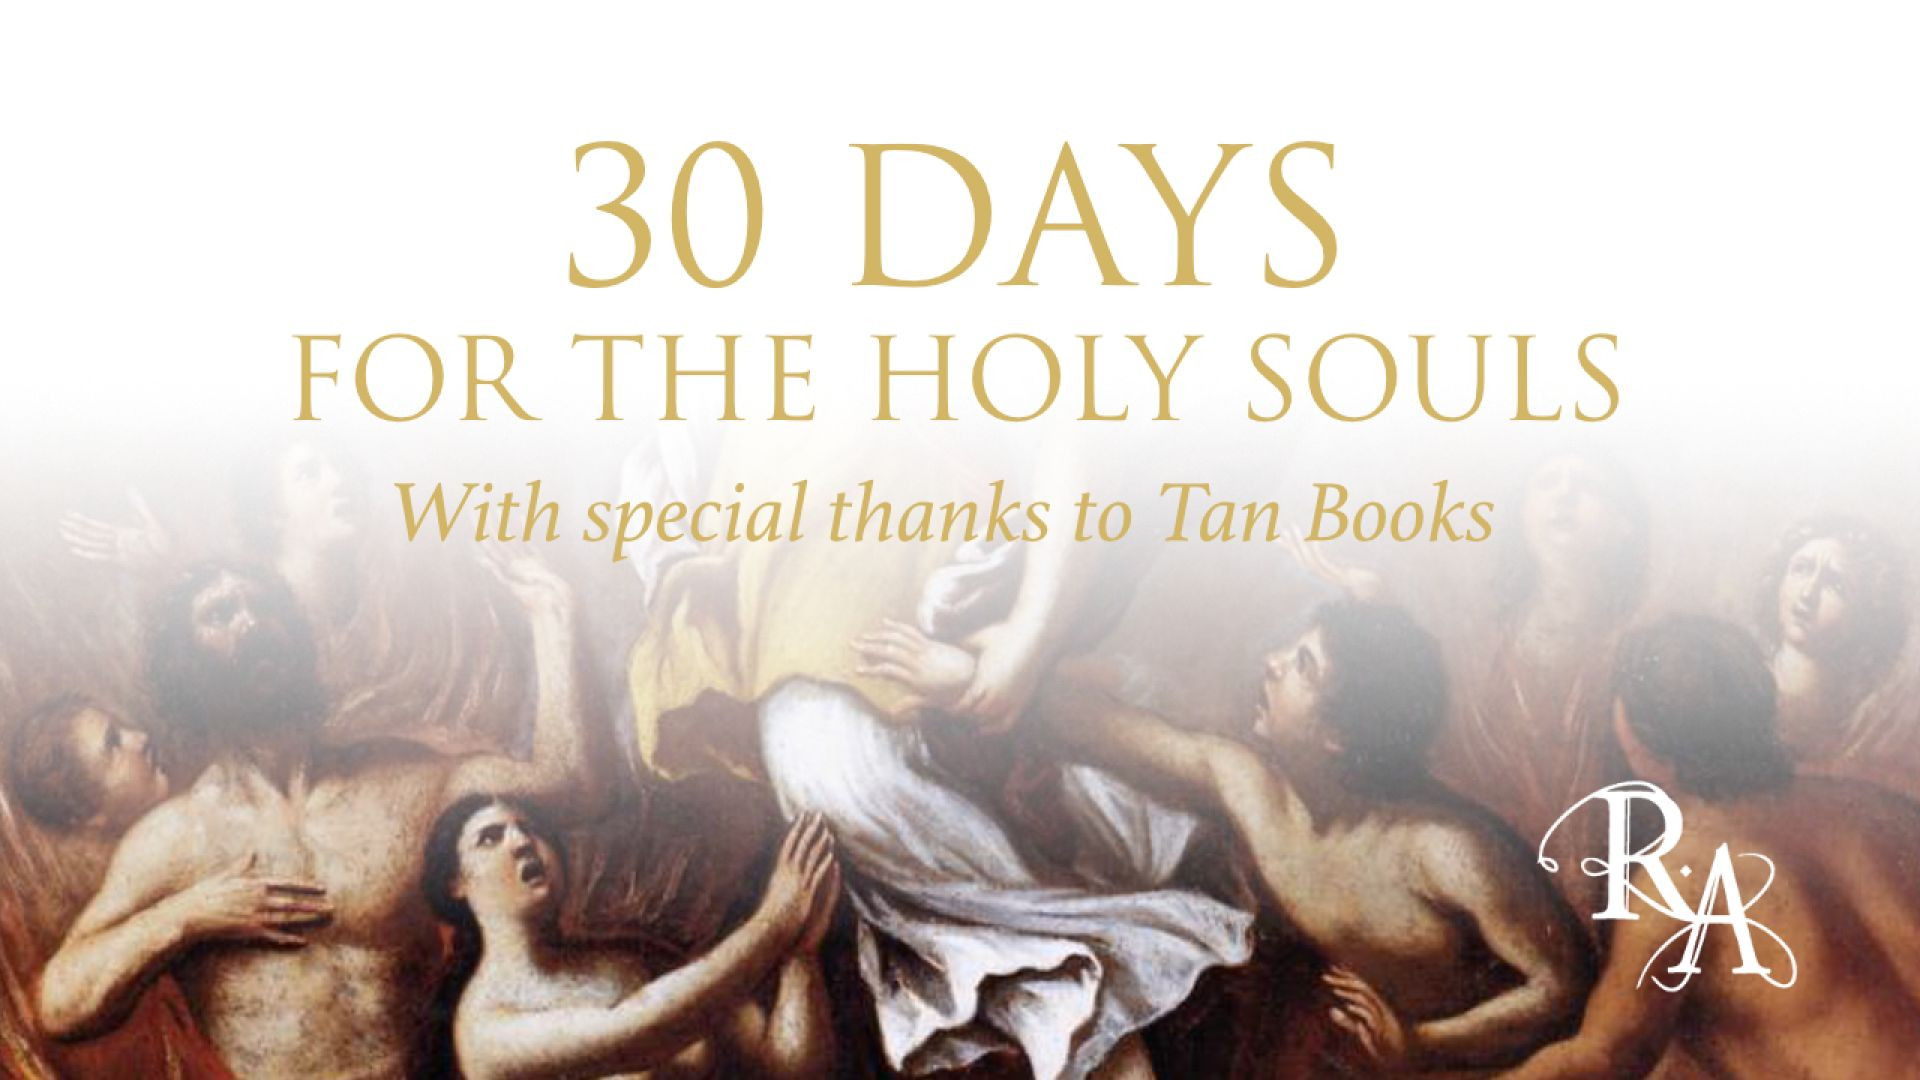 30 days for the Holy Souls - 3rd November